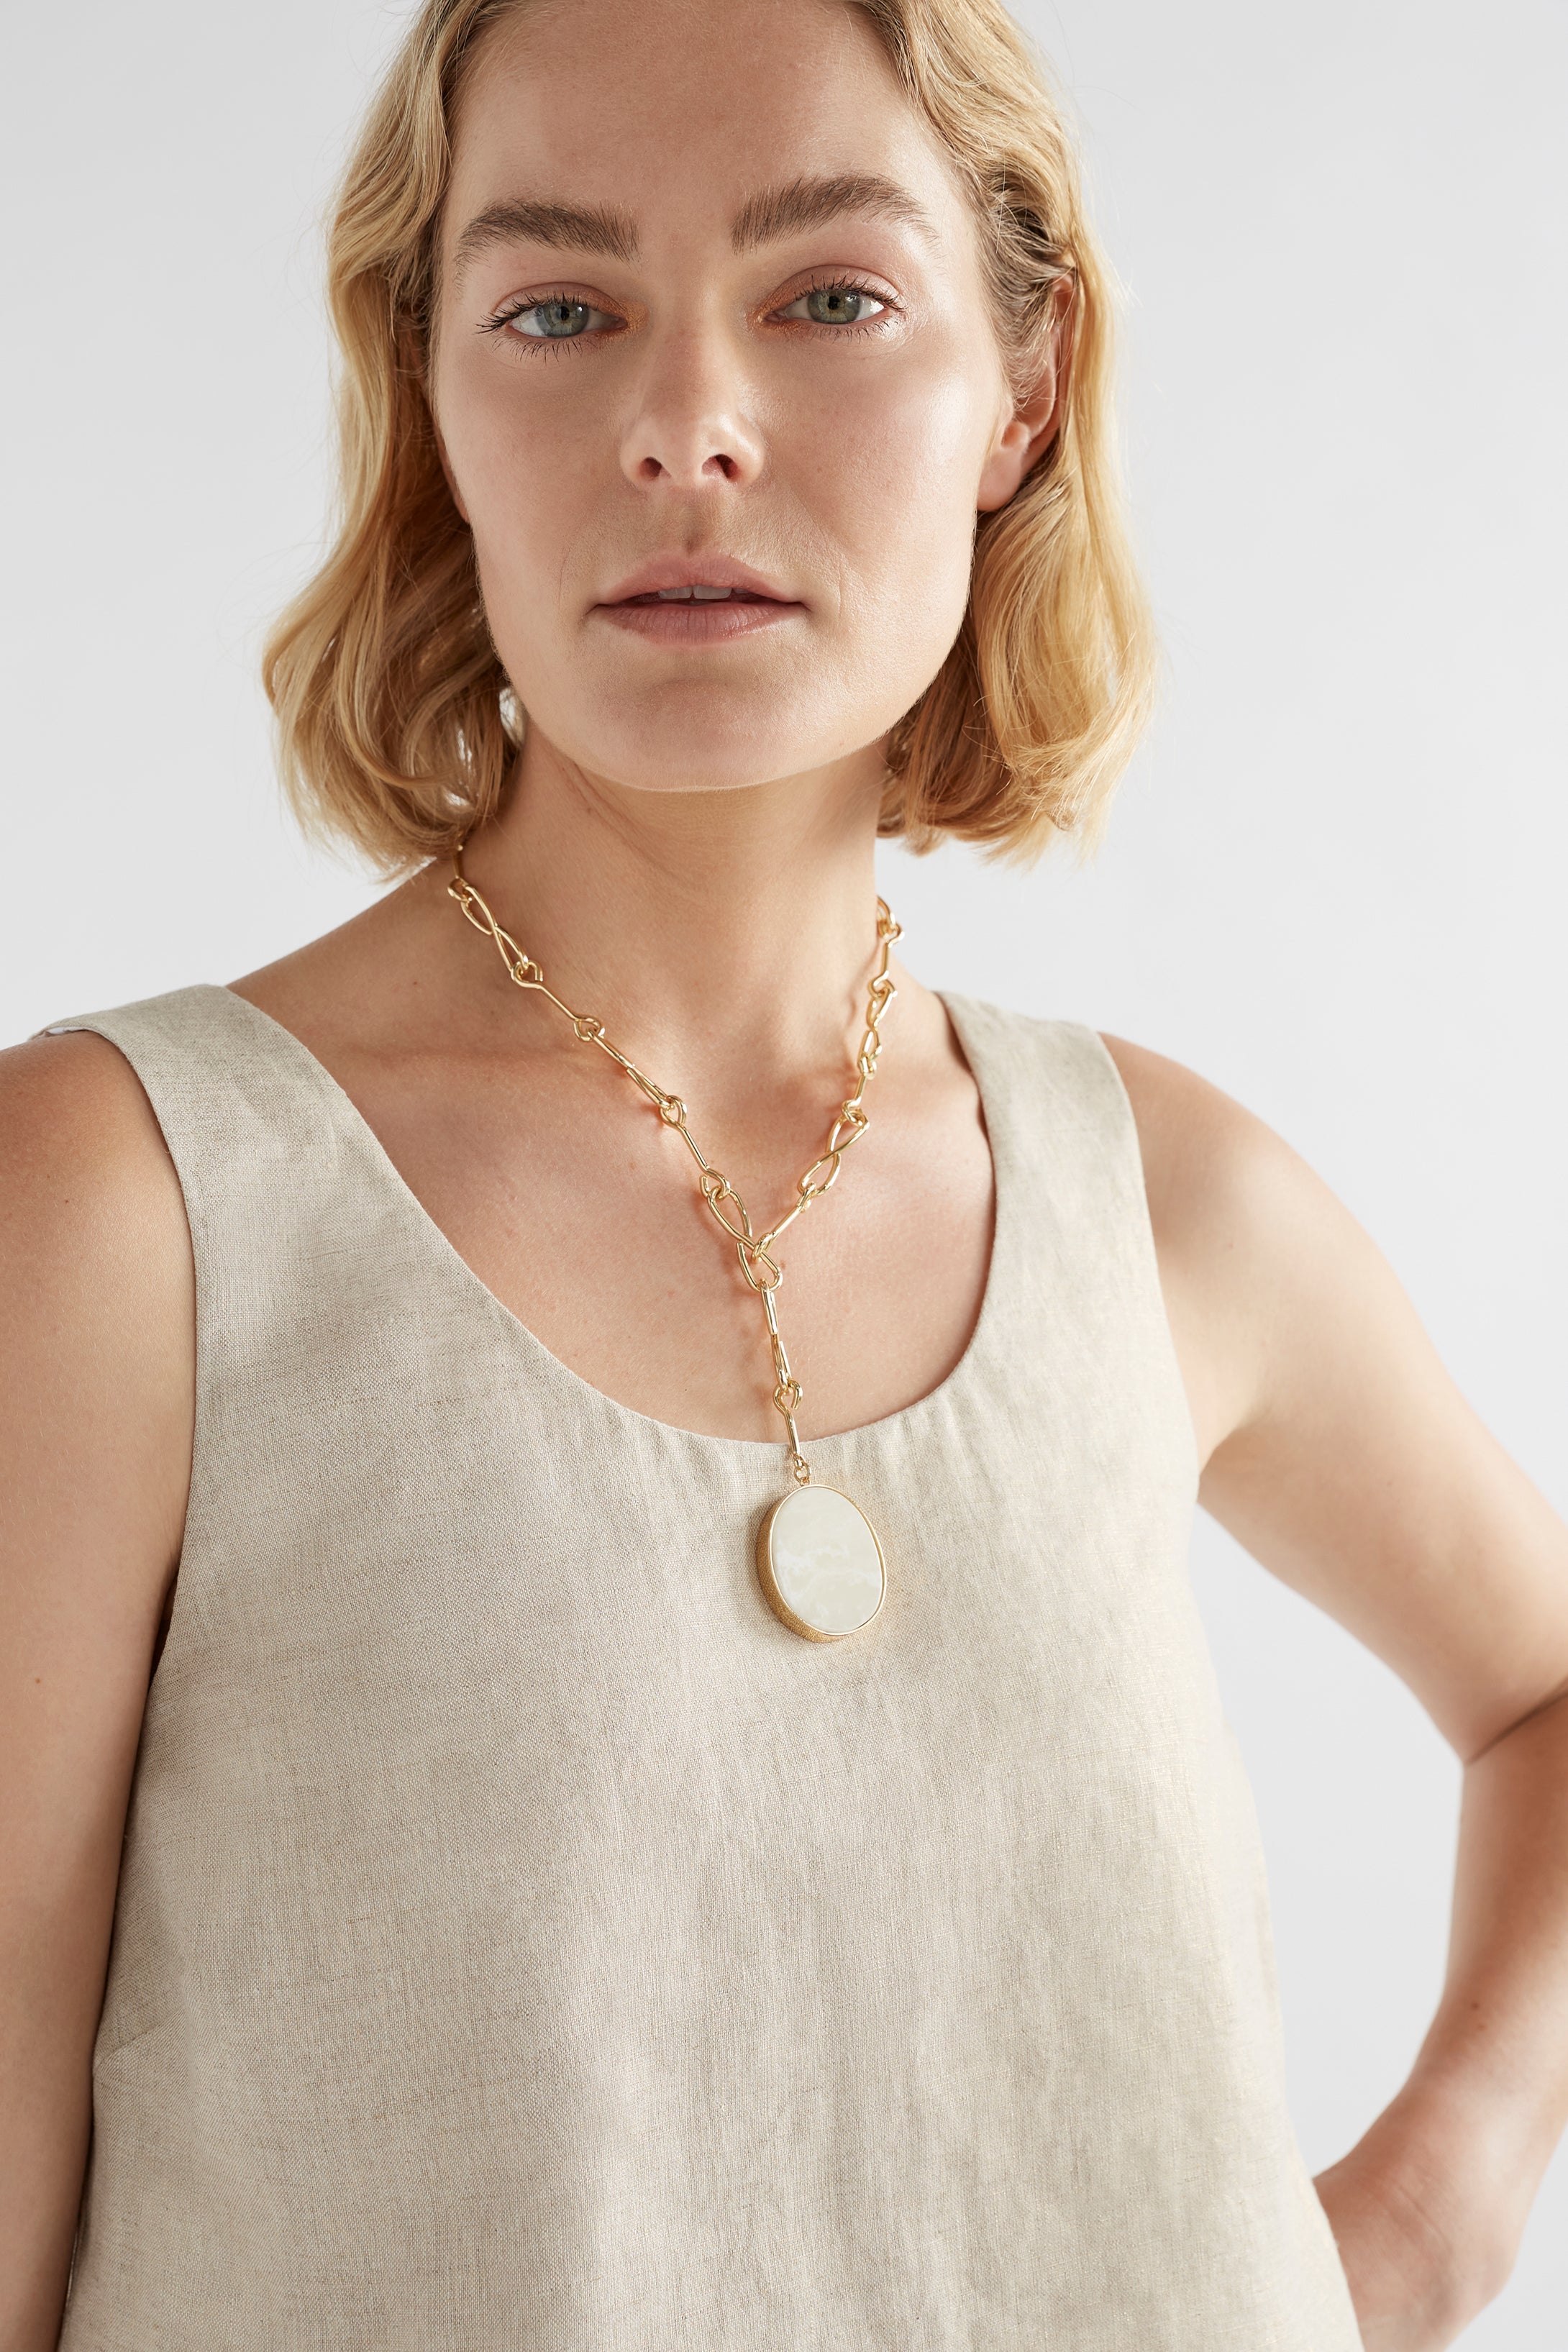 Kriis Gold Chain with Stone Pendant Necklace Model SAND